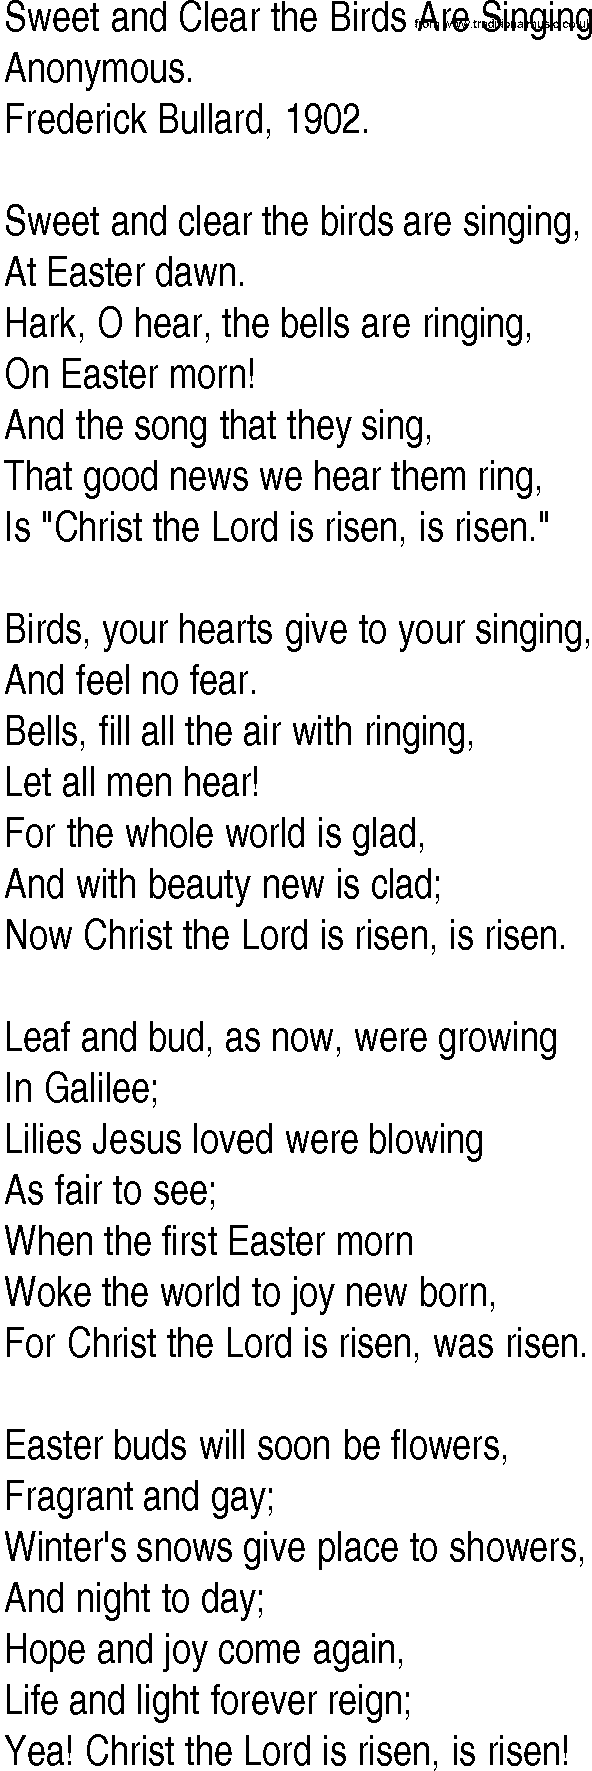 Hymn and Gospel Song: Sweet and Clear the Birds Are Singing by Anonymous lyrics